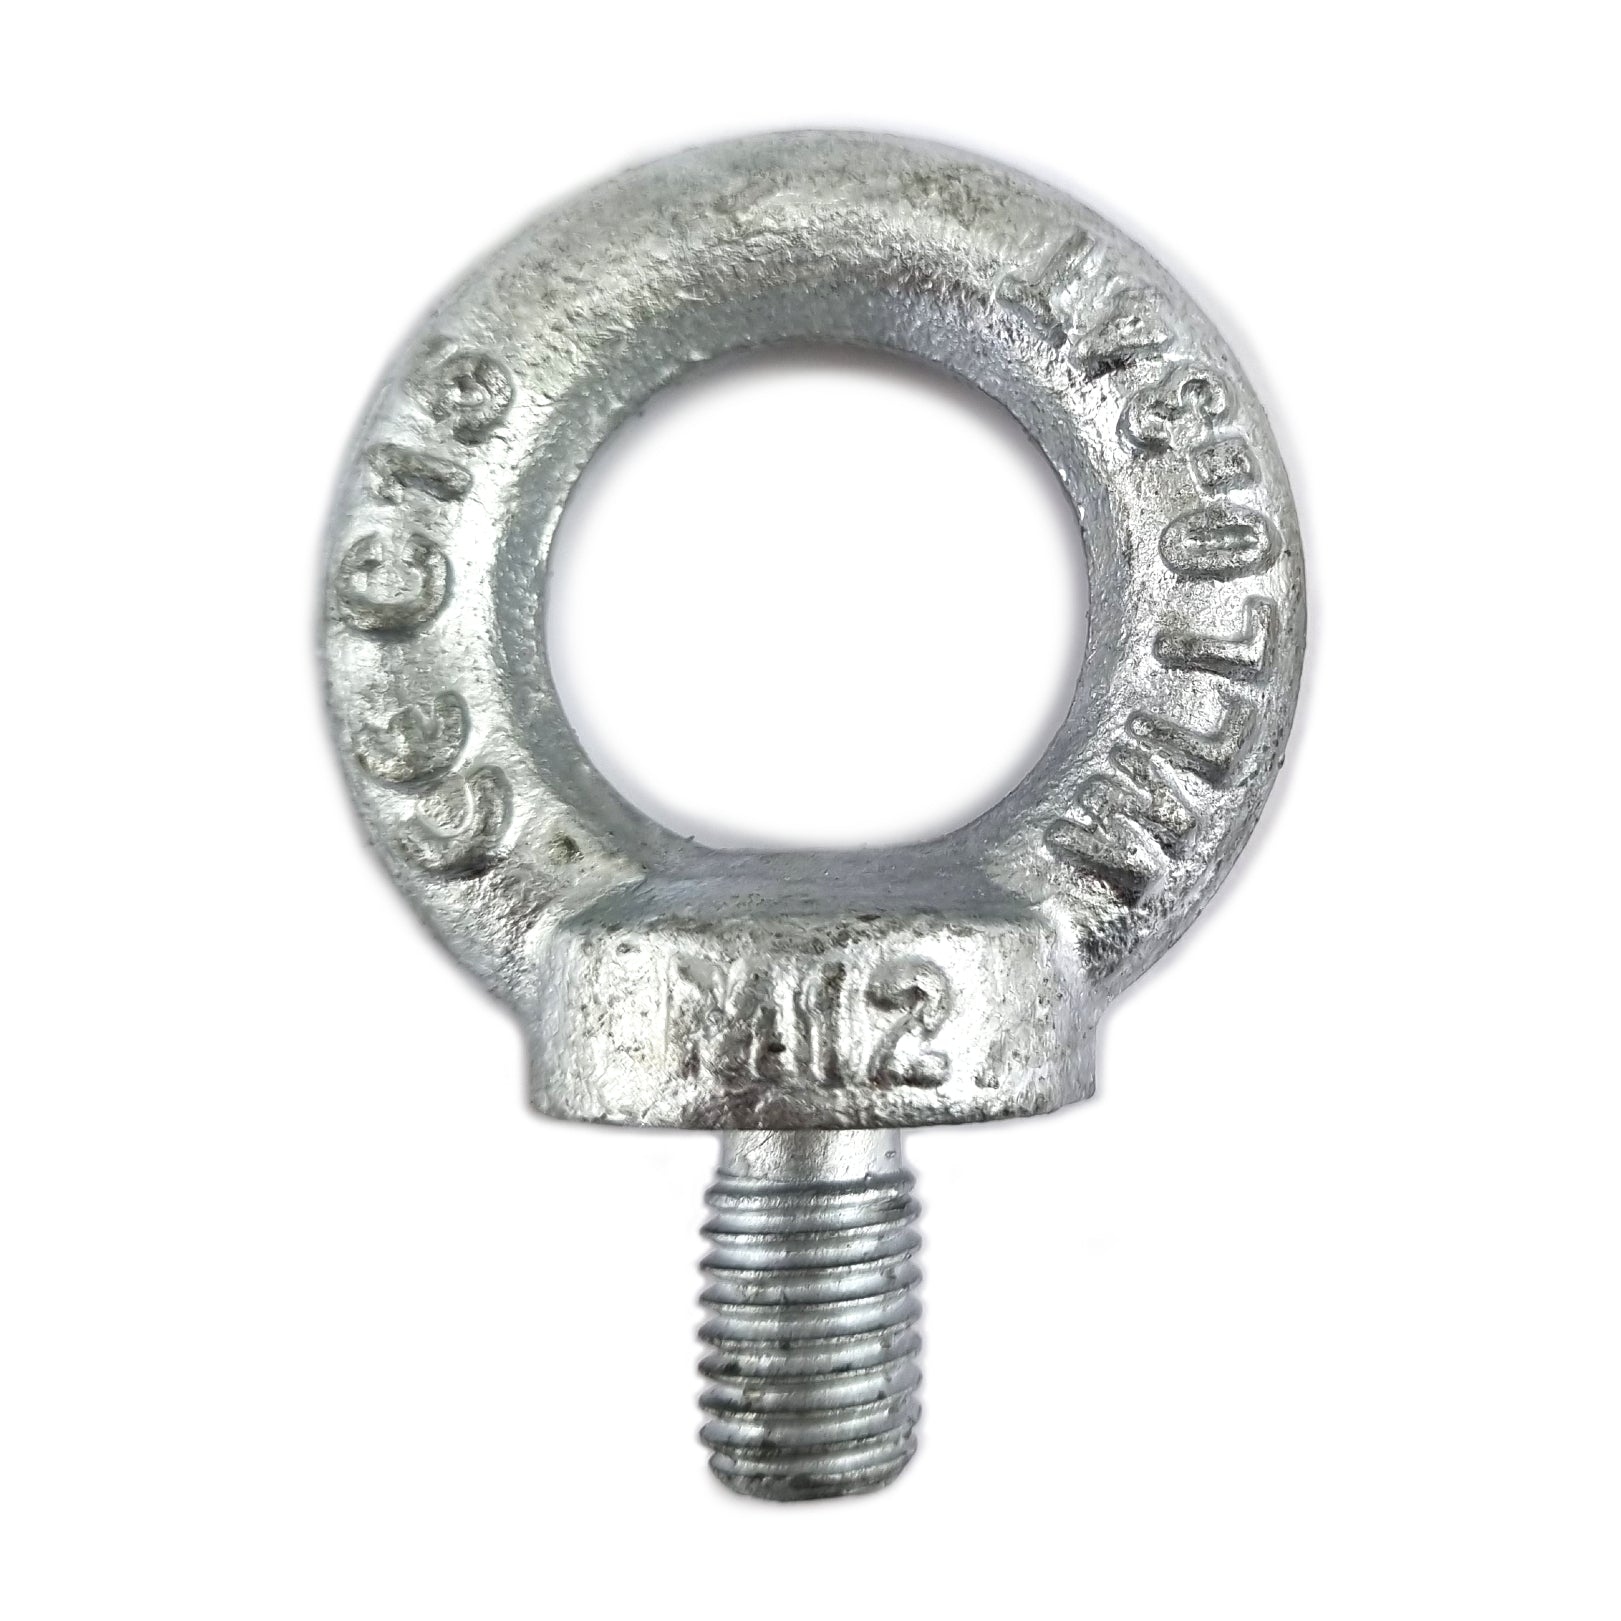 Lifting Eye Bolts, Galvanised. Various sizes. Shop hardware bolts online. Australia wide shipping.